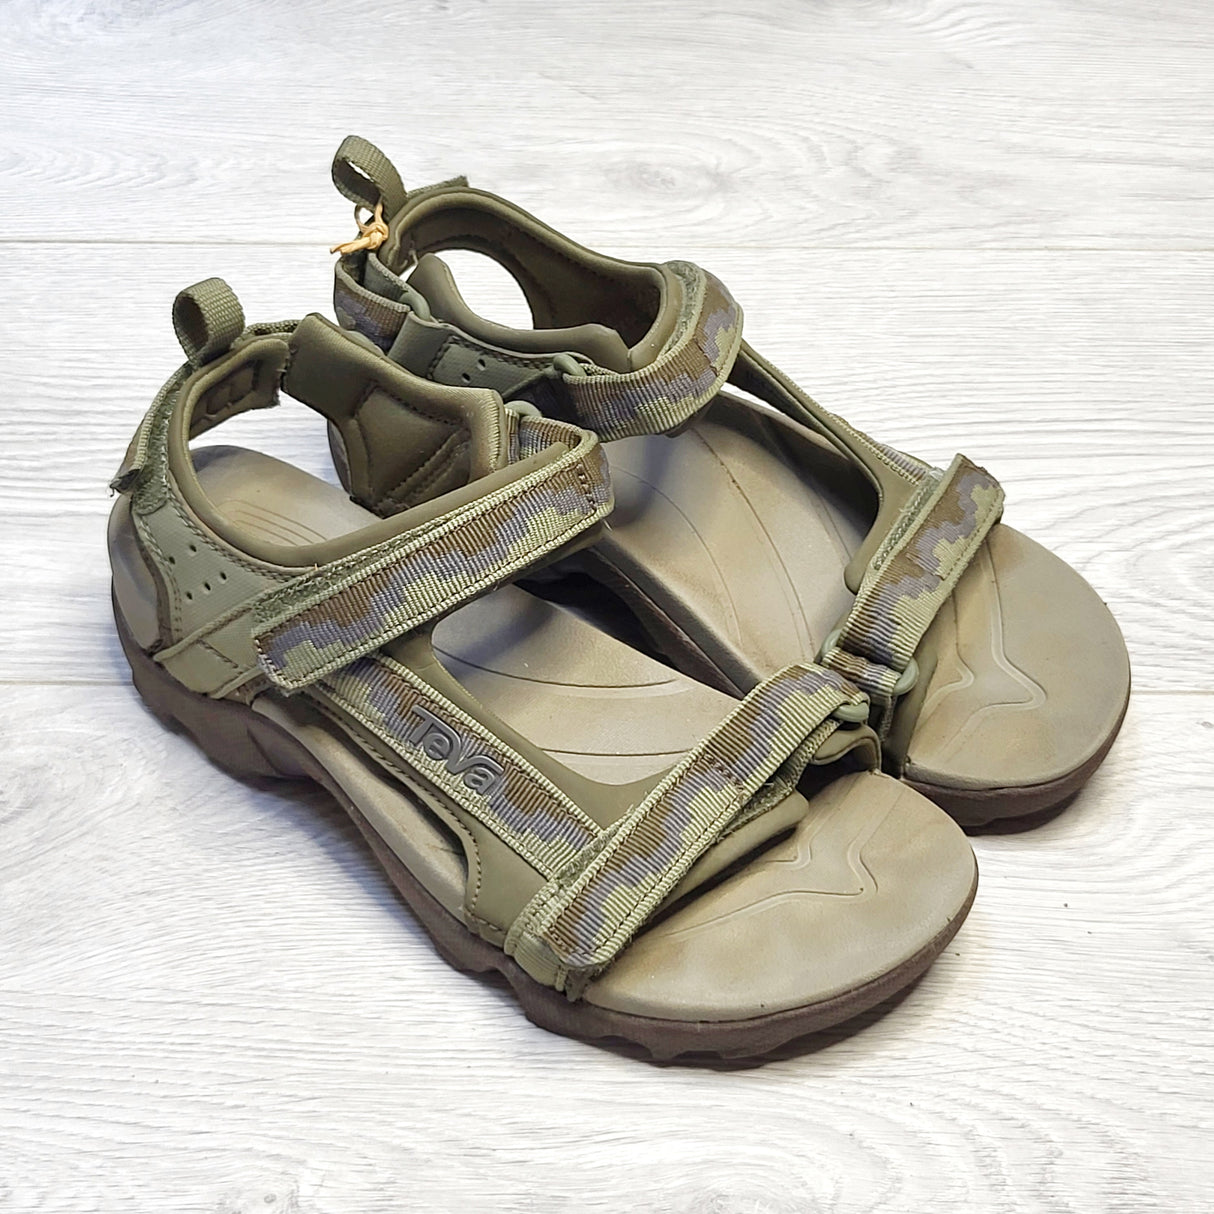 ANHA1- Teva "Tanza" sandals, youth size 3